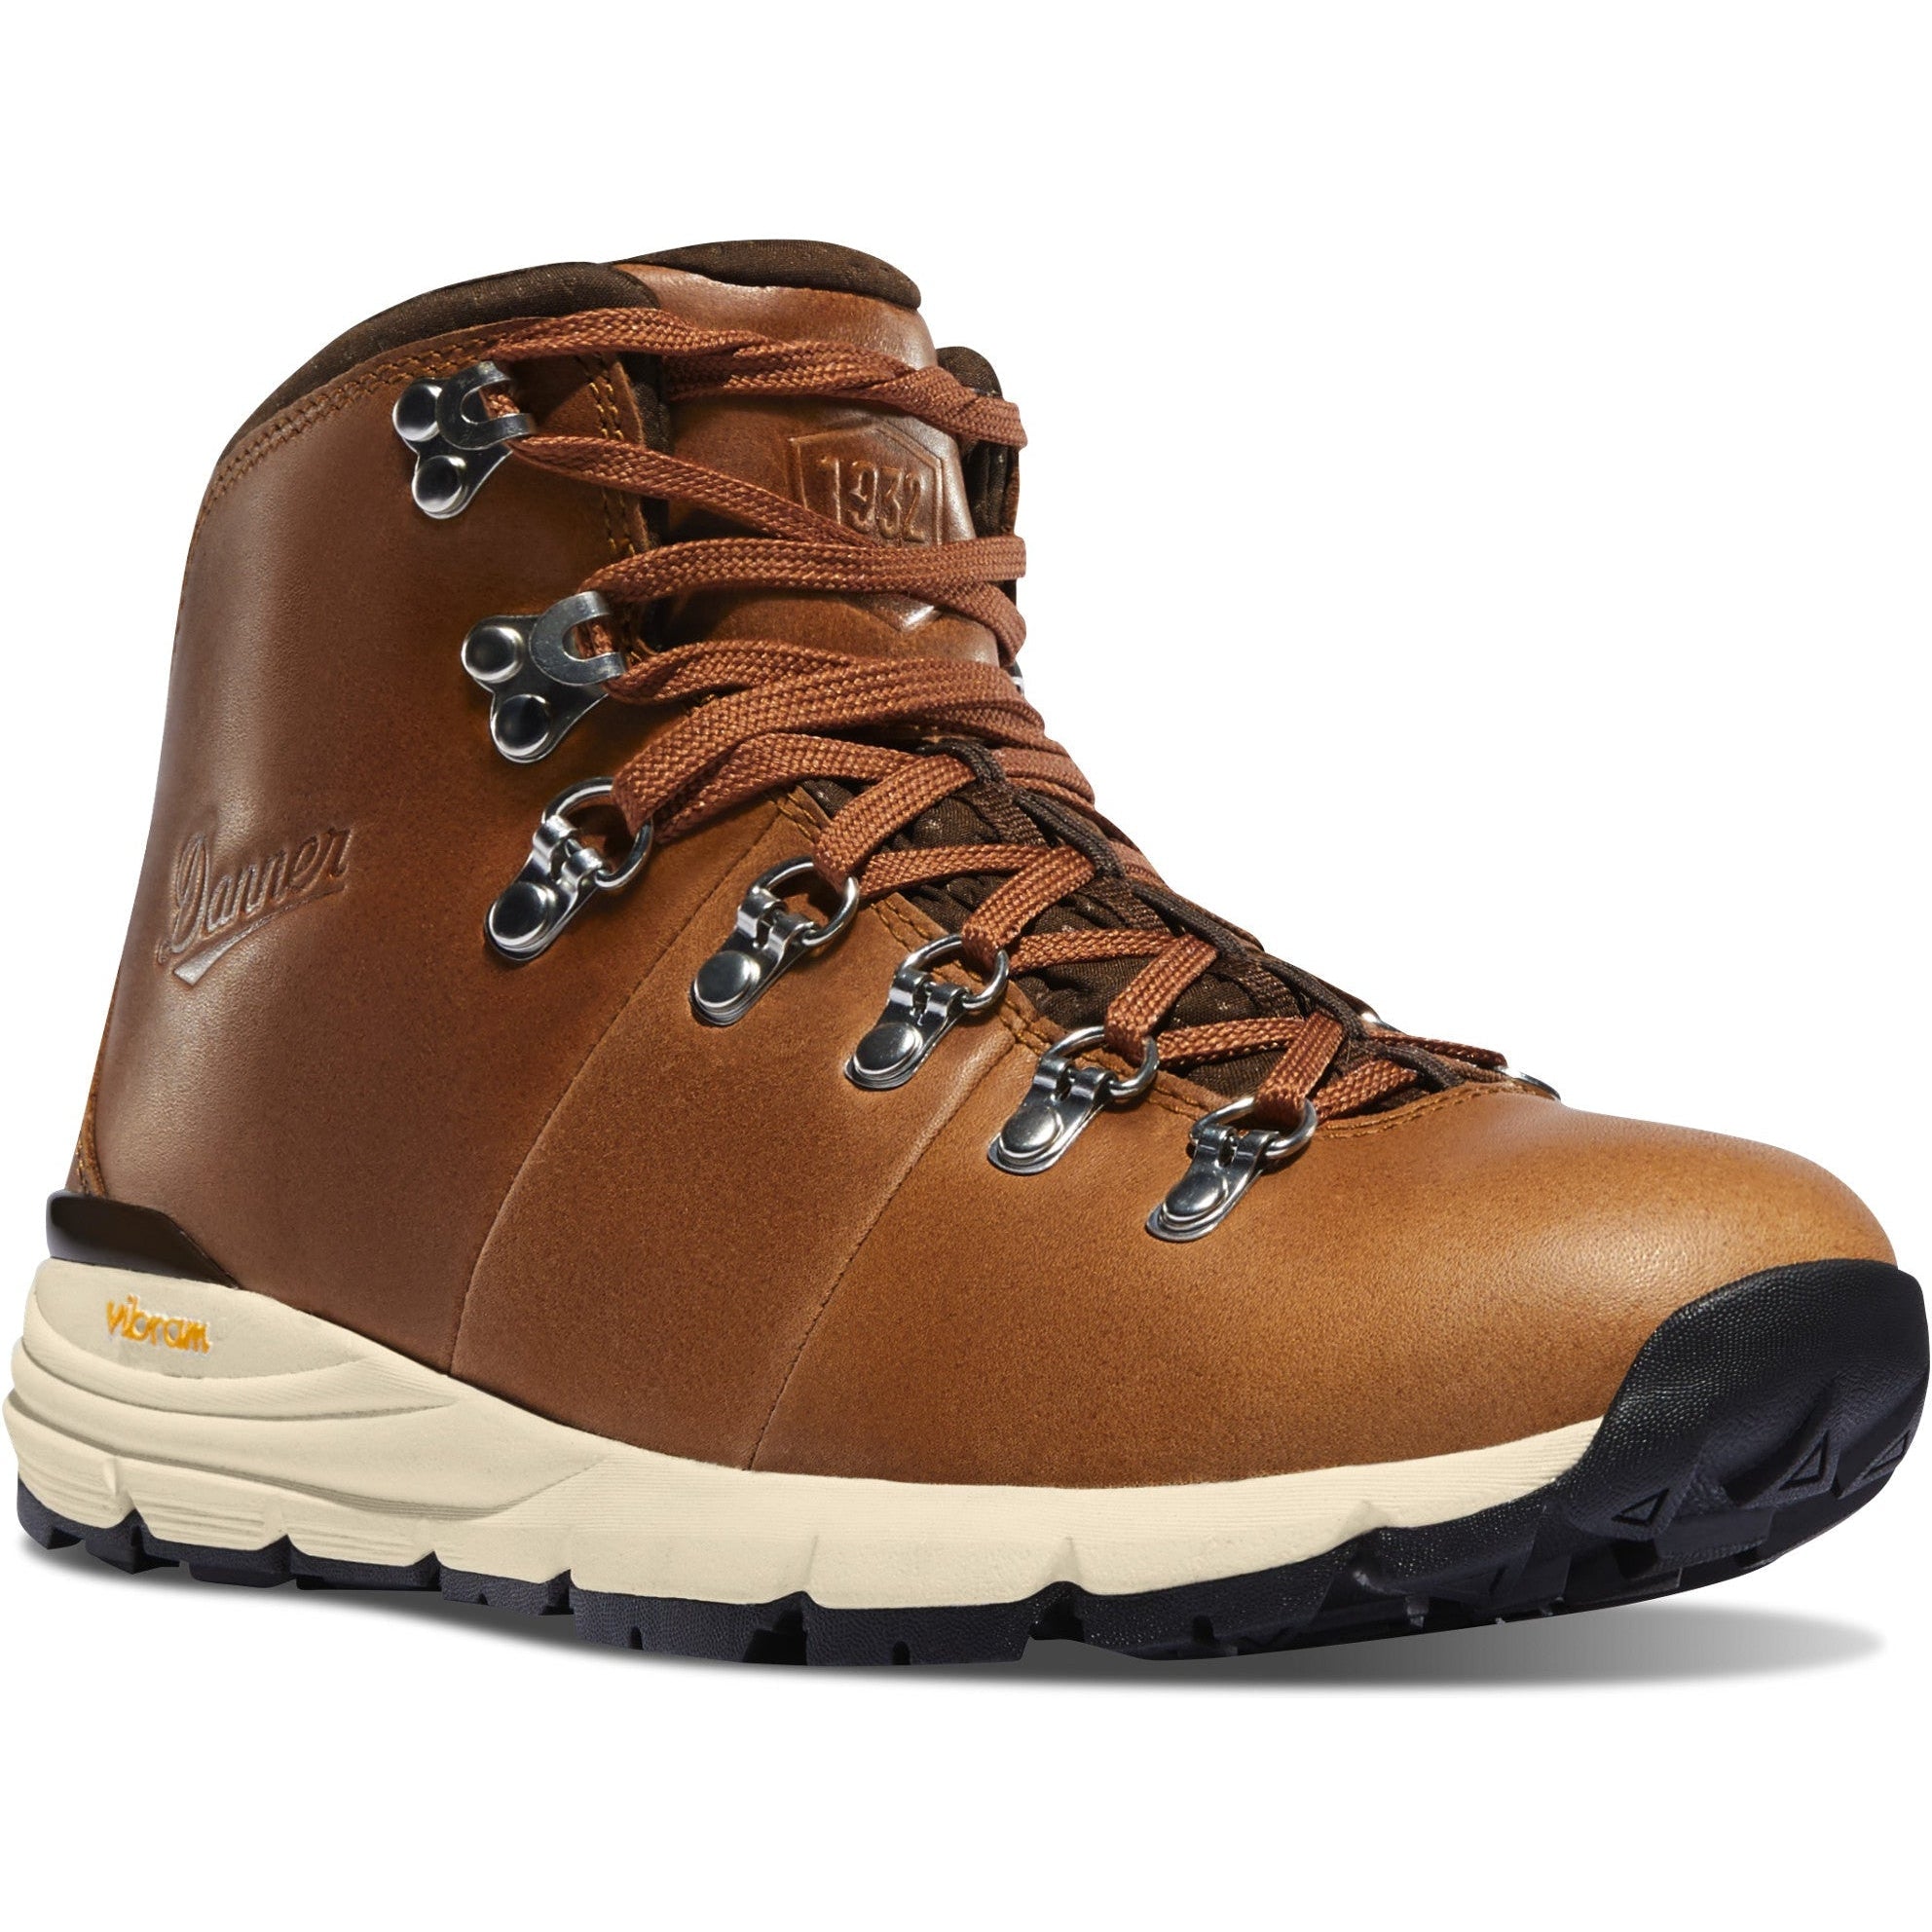 Danner Women's Mountain 600 4.5" WP Hiking Boot - Saddle Tan - 62259  - Overlook Boots